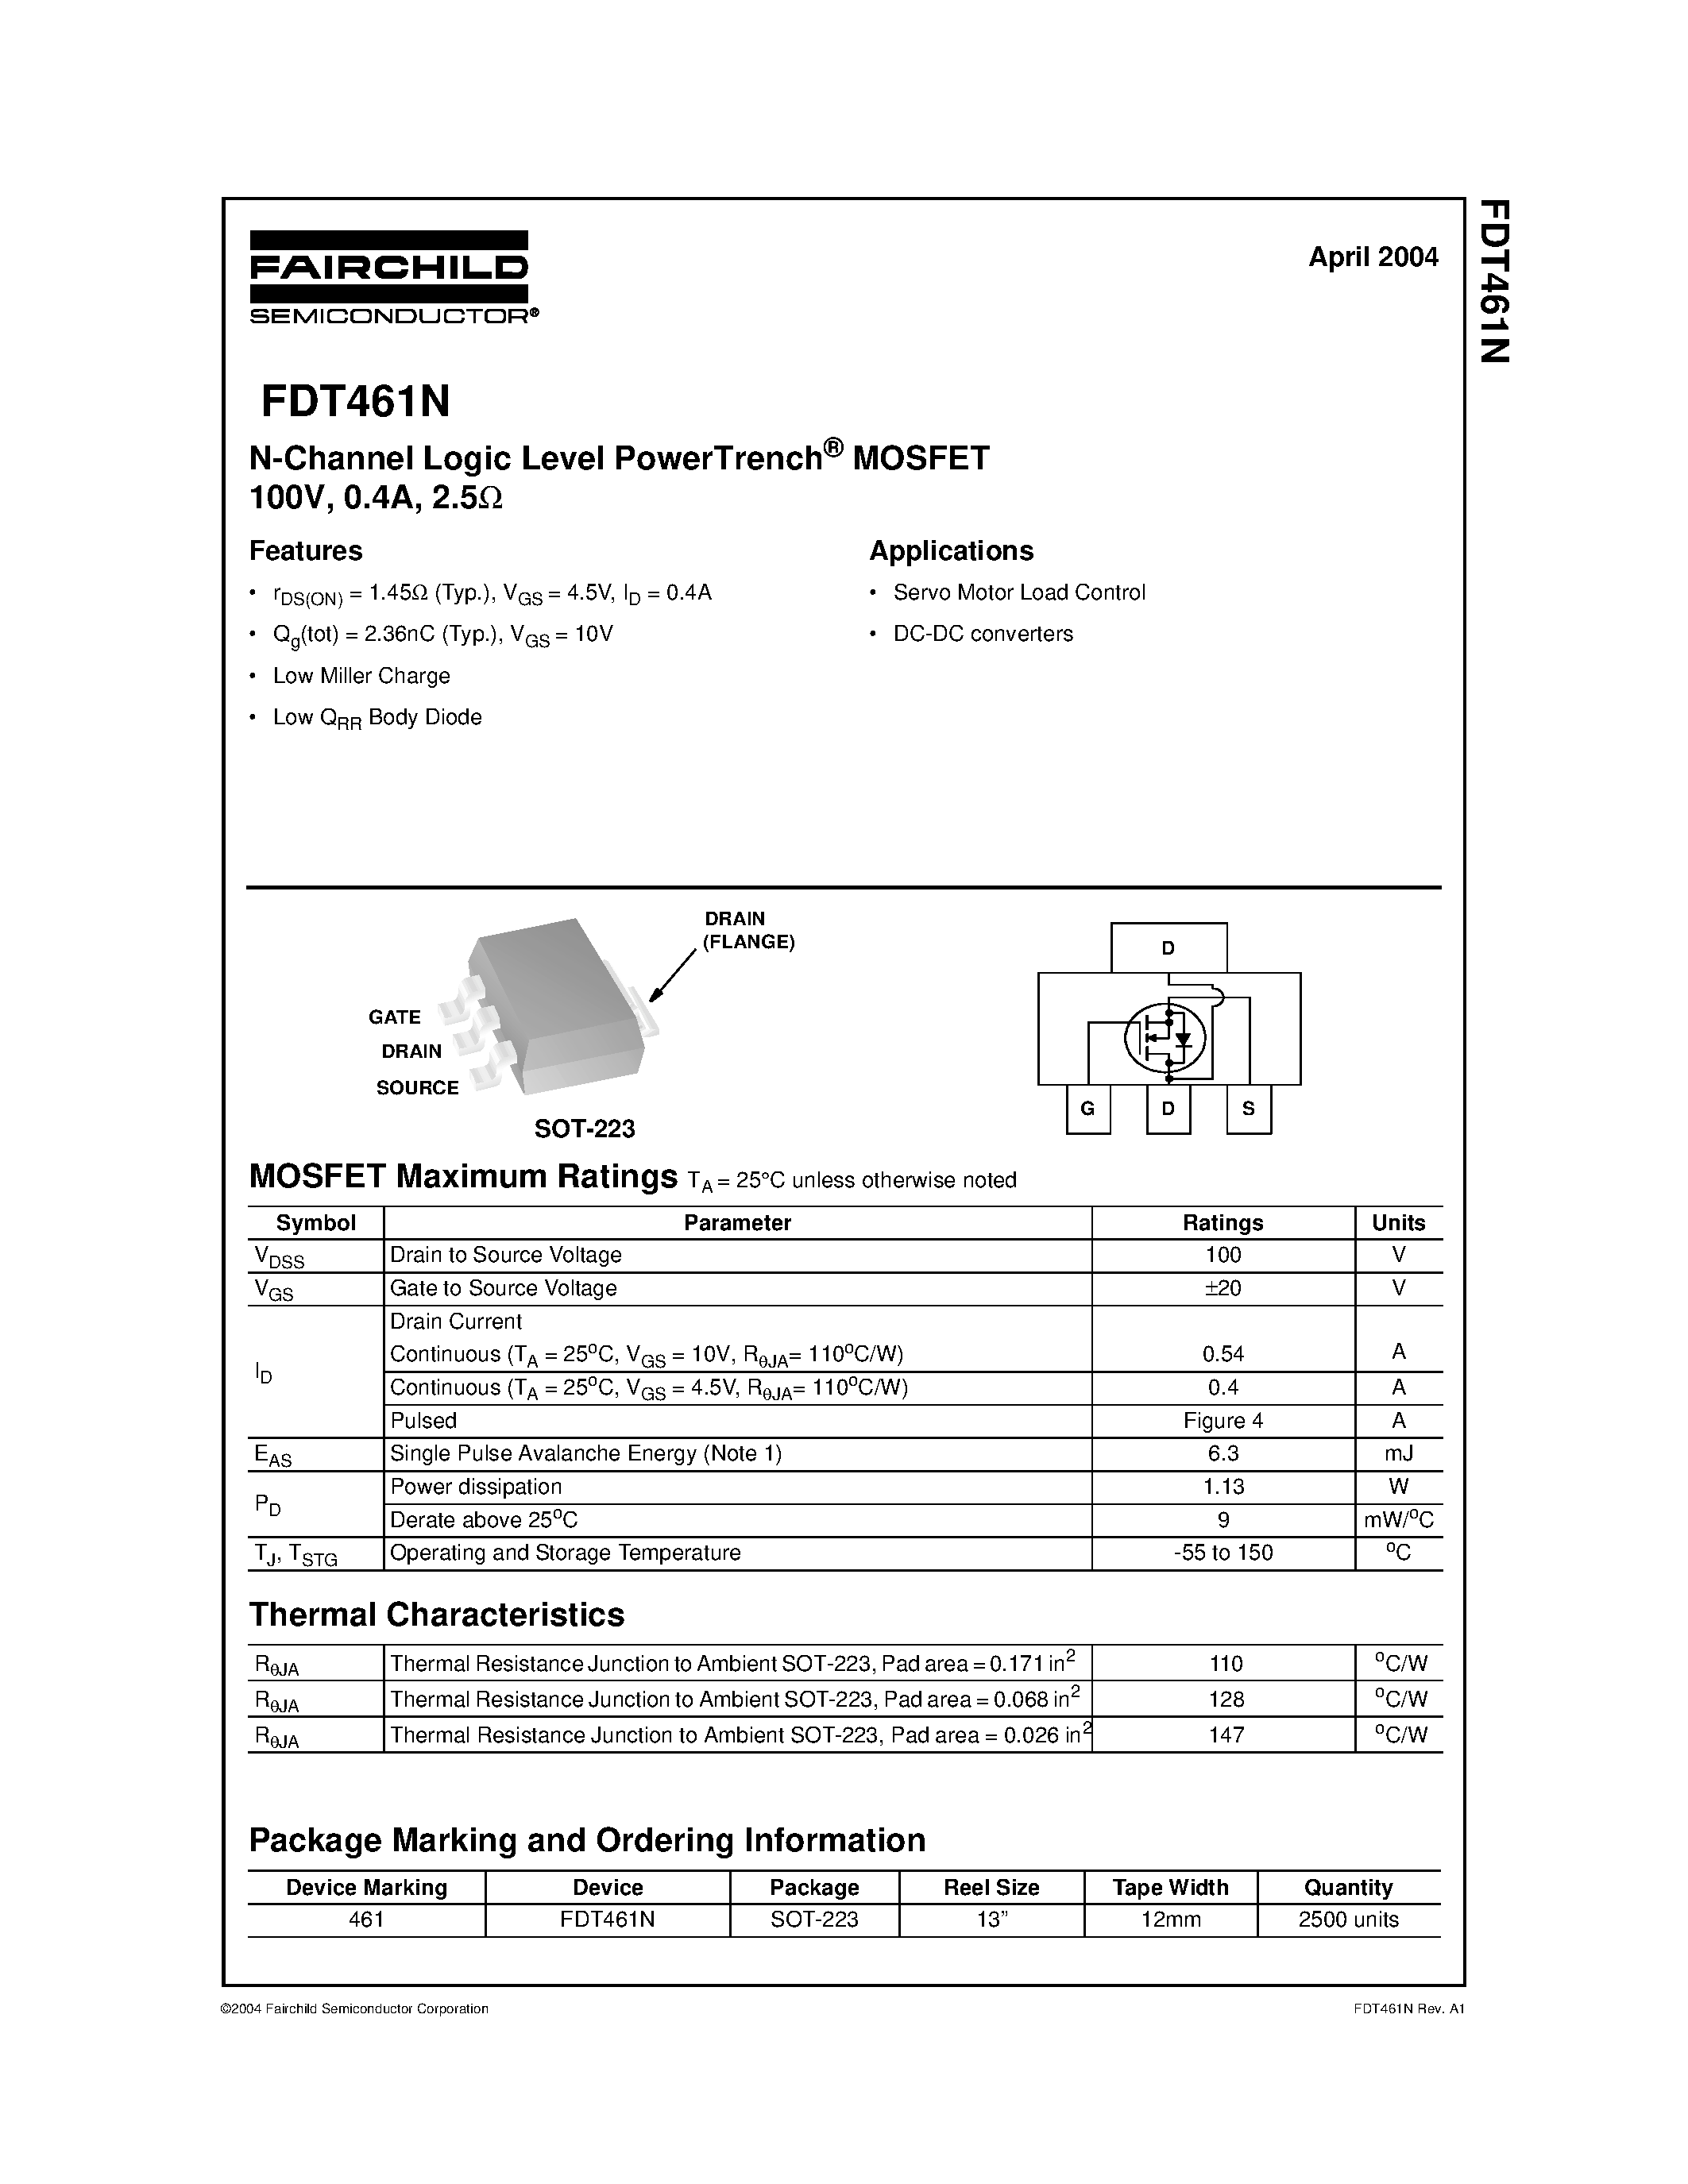 Даташит FDT461N-N-Channel Logic Level PowerTrench MOSFET страница 1